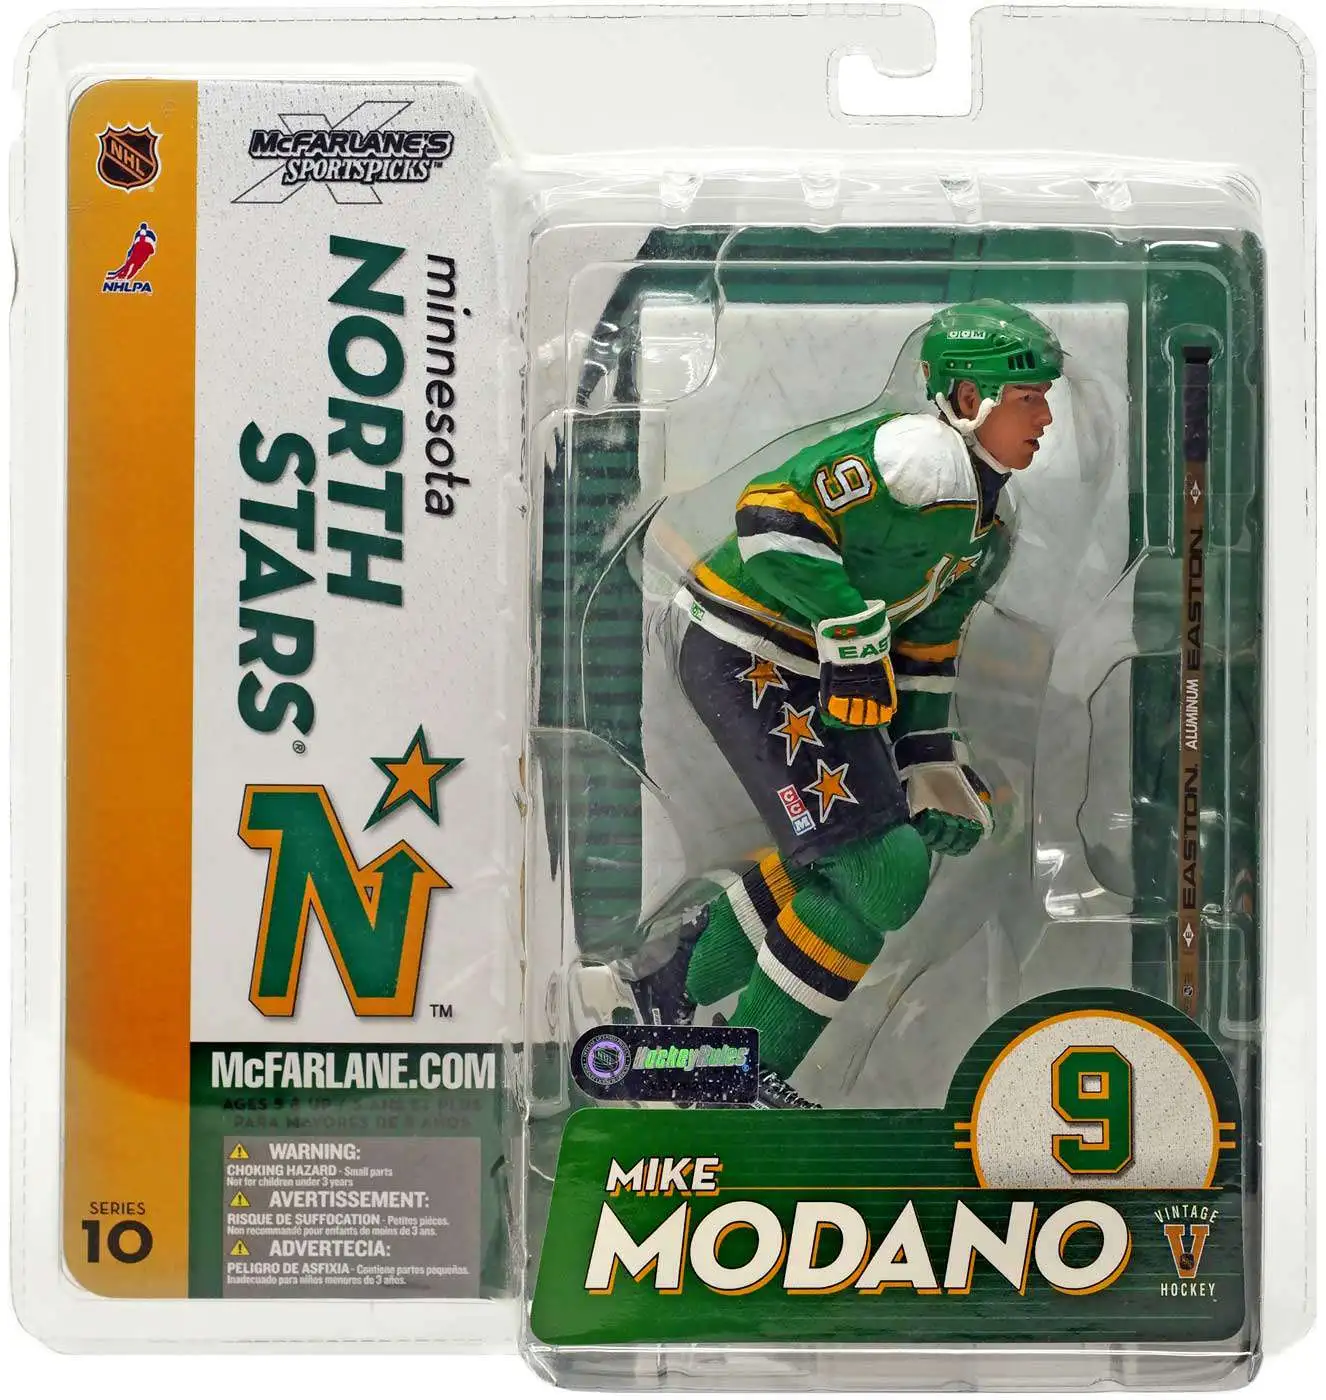 NHL99: Mike Modano set a new standard for U.S.-born players, with